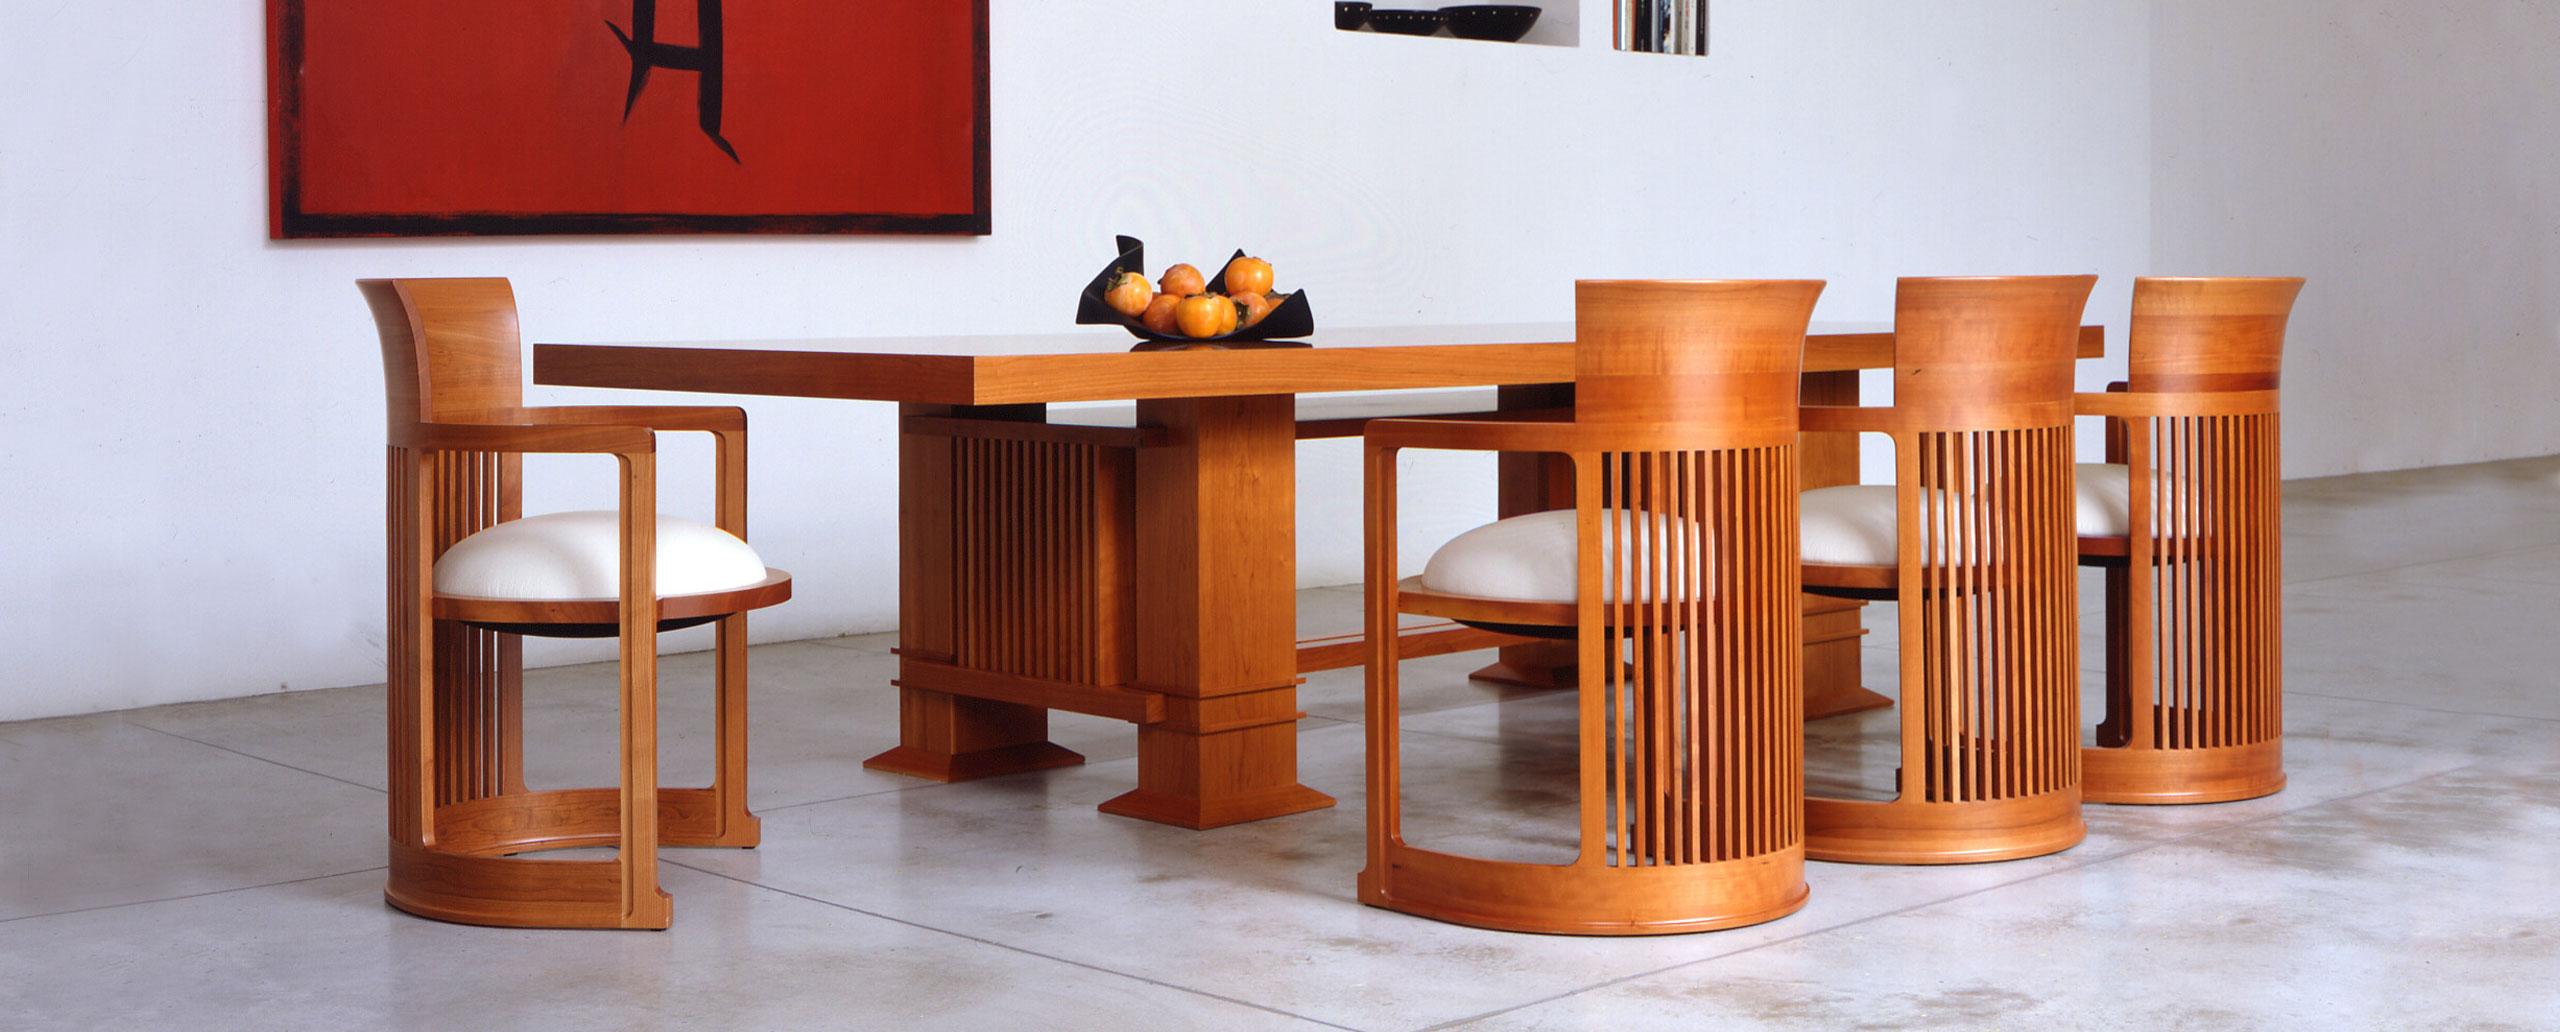 Table designed by Frank Lloyd Wright in 1917, relaunched in 1986.
Manufactured by Cassina in Italy.

Important information regarding images of products:
Please note that some of the images show other colors and variations of the model, these